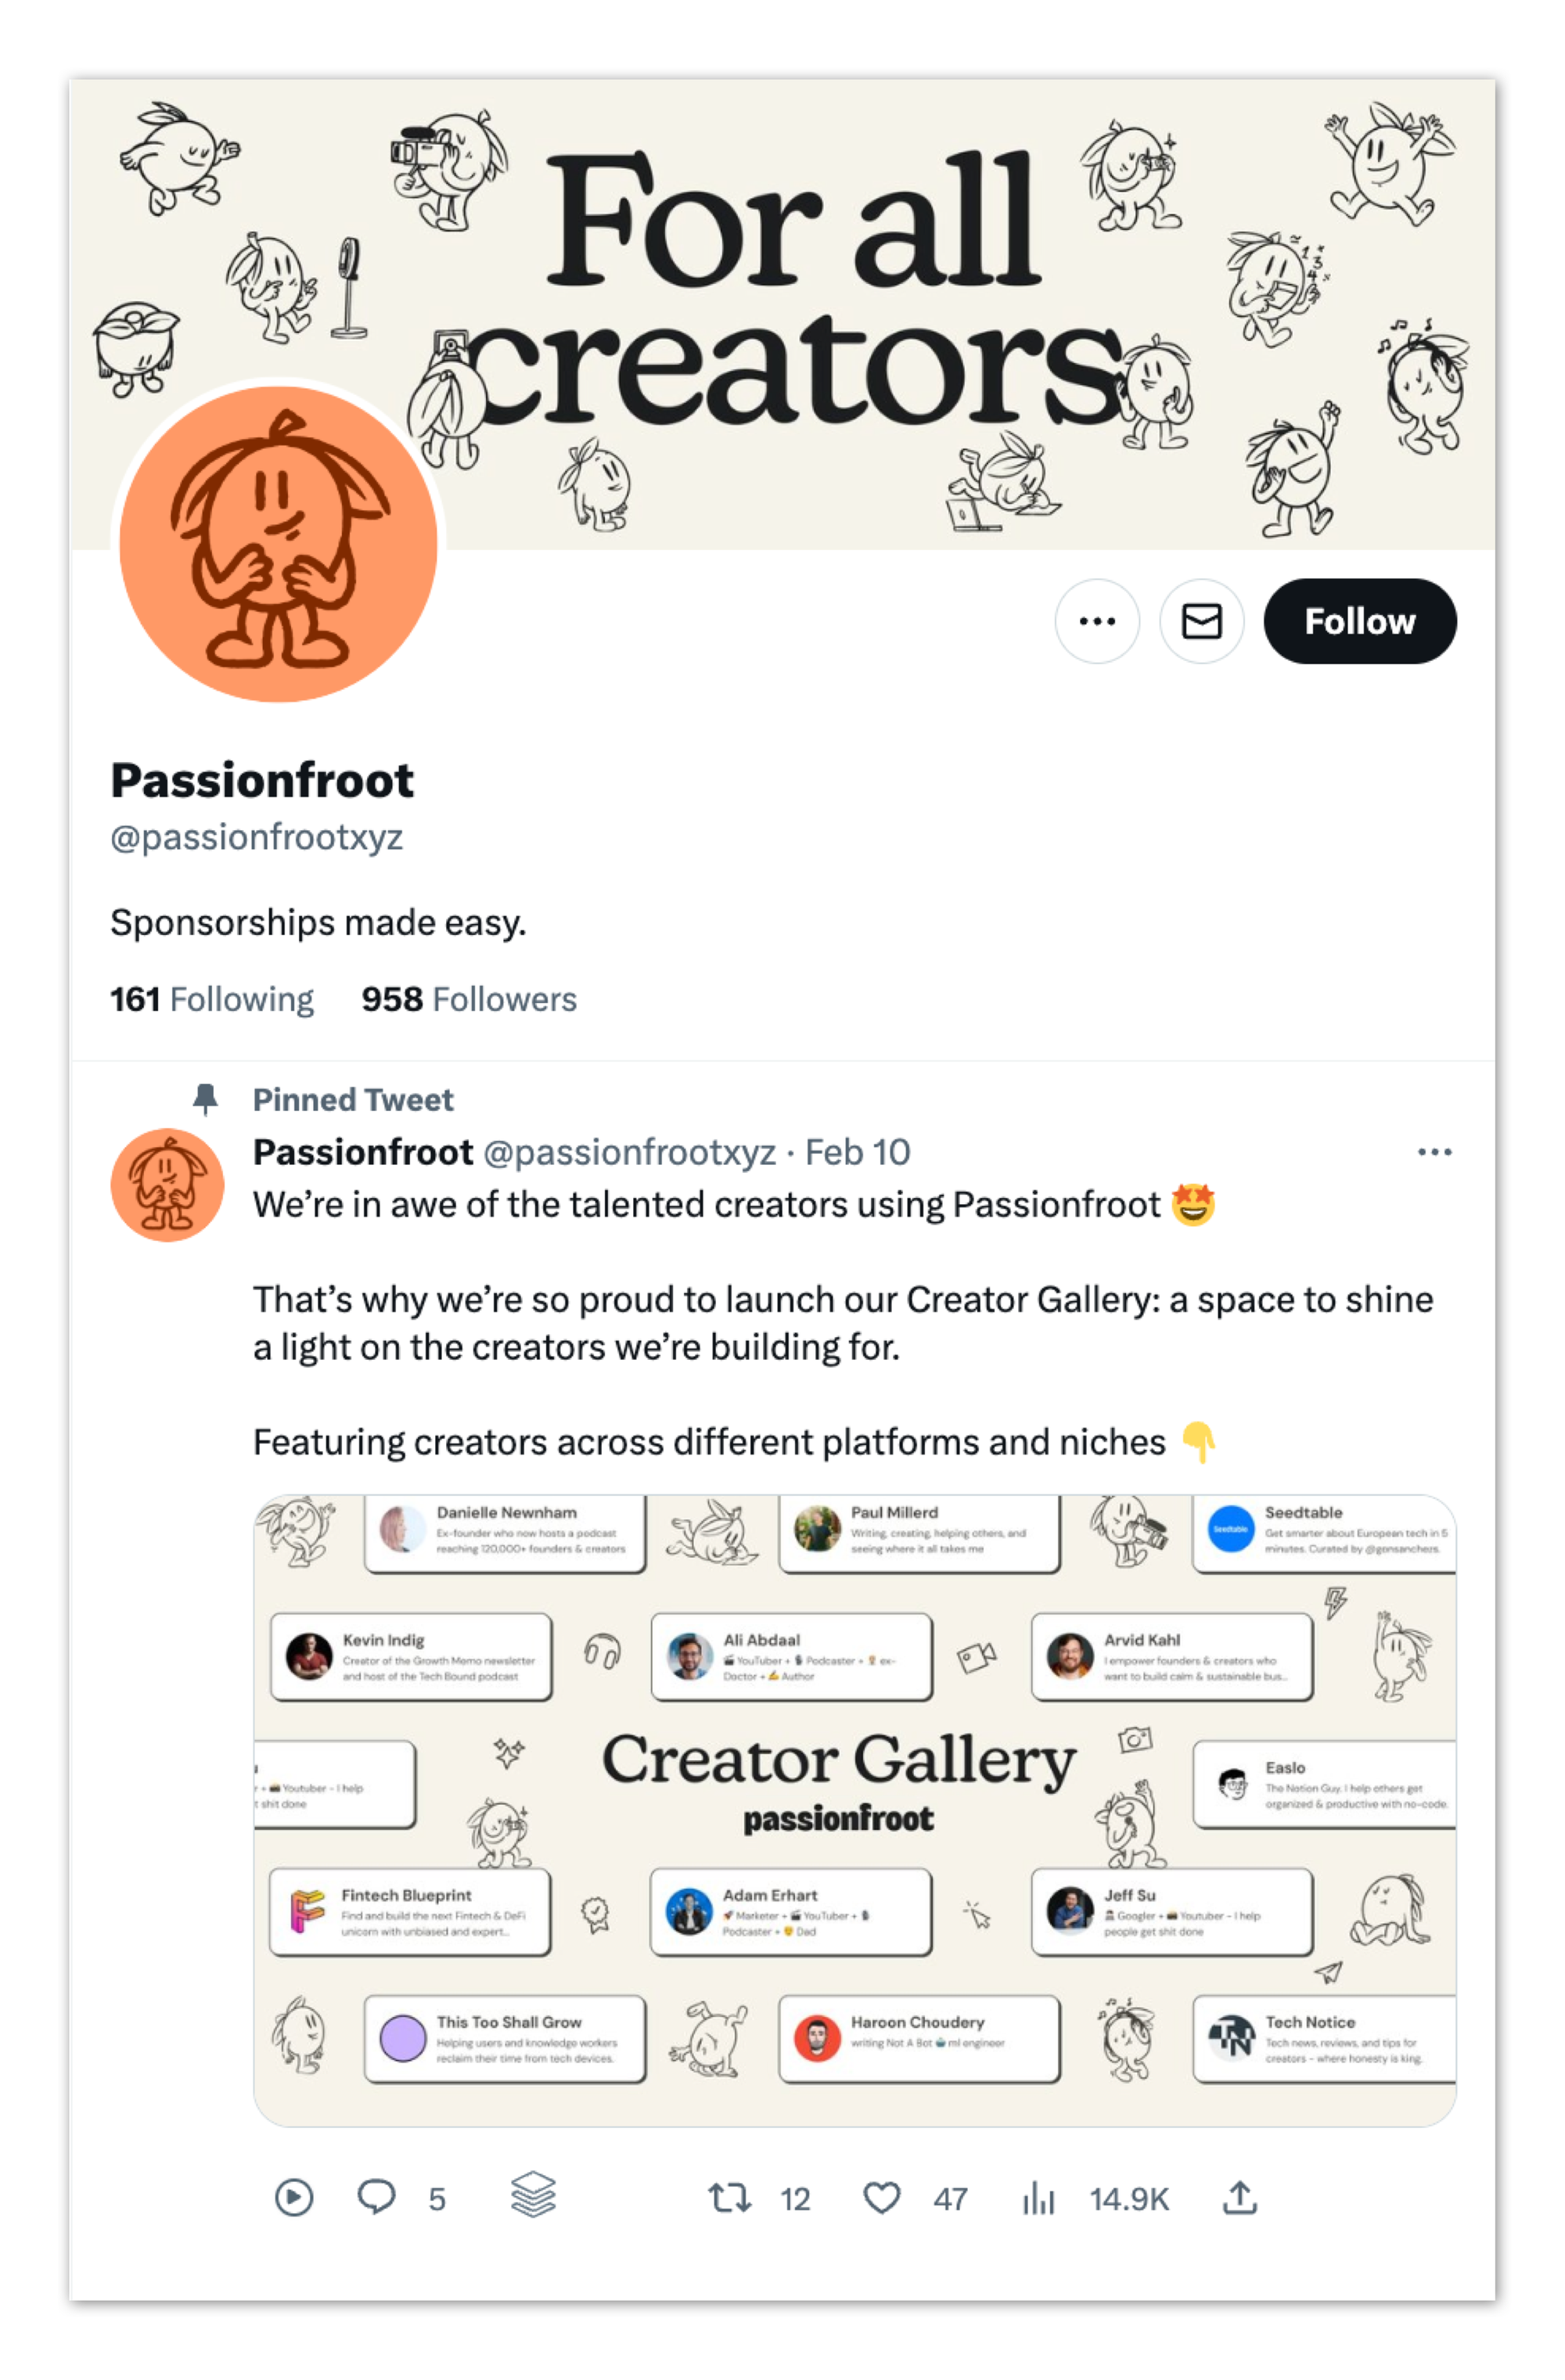 Passionfroot's Twitter account